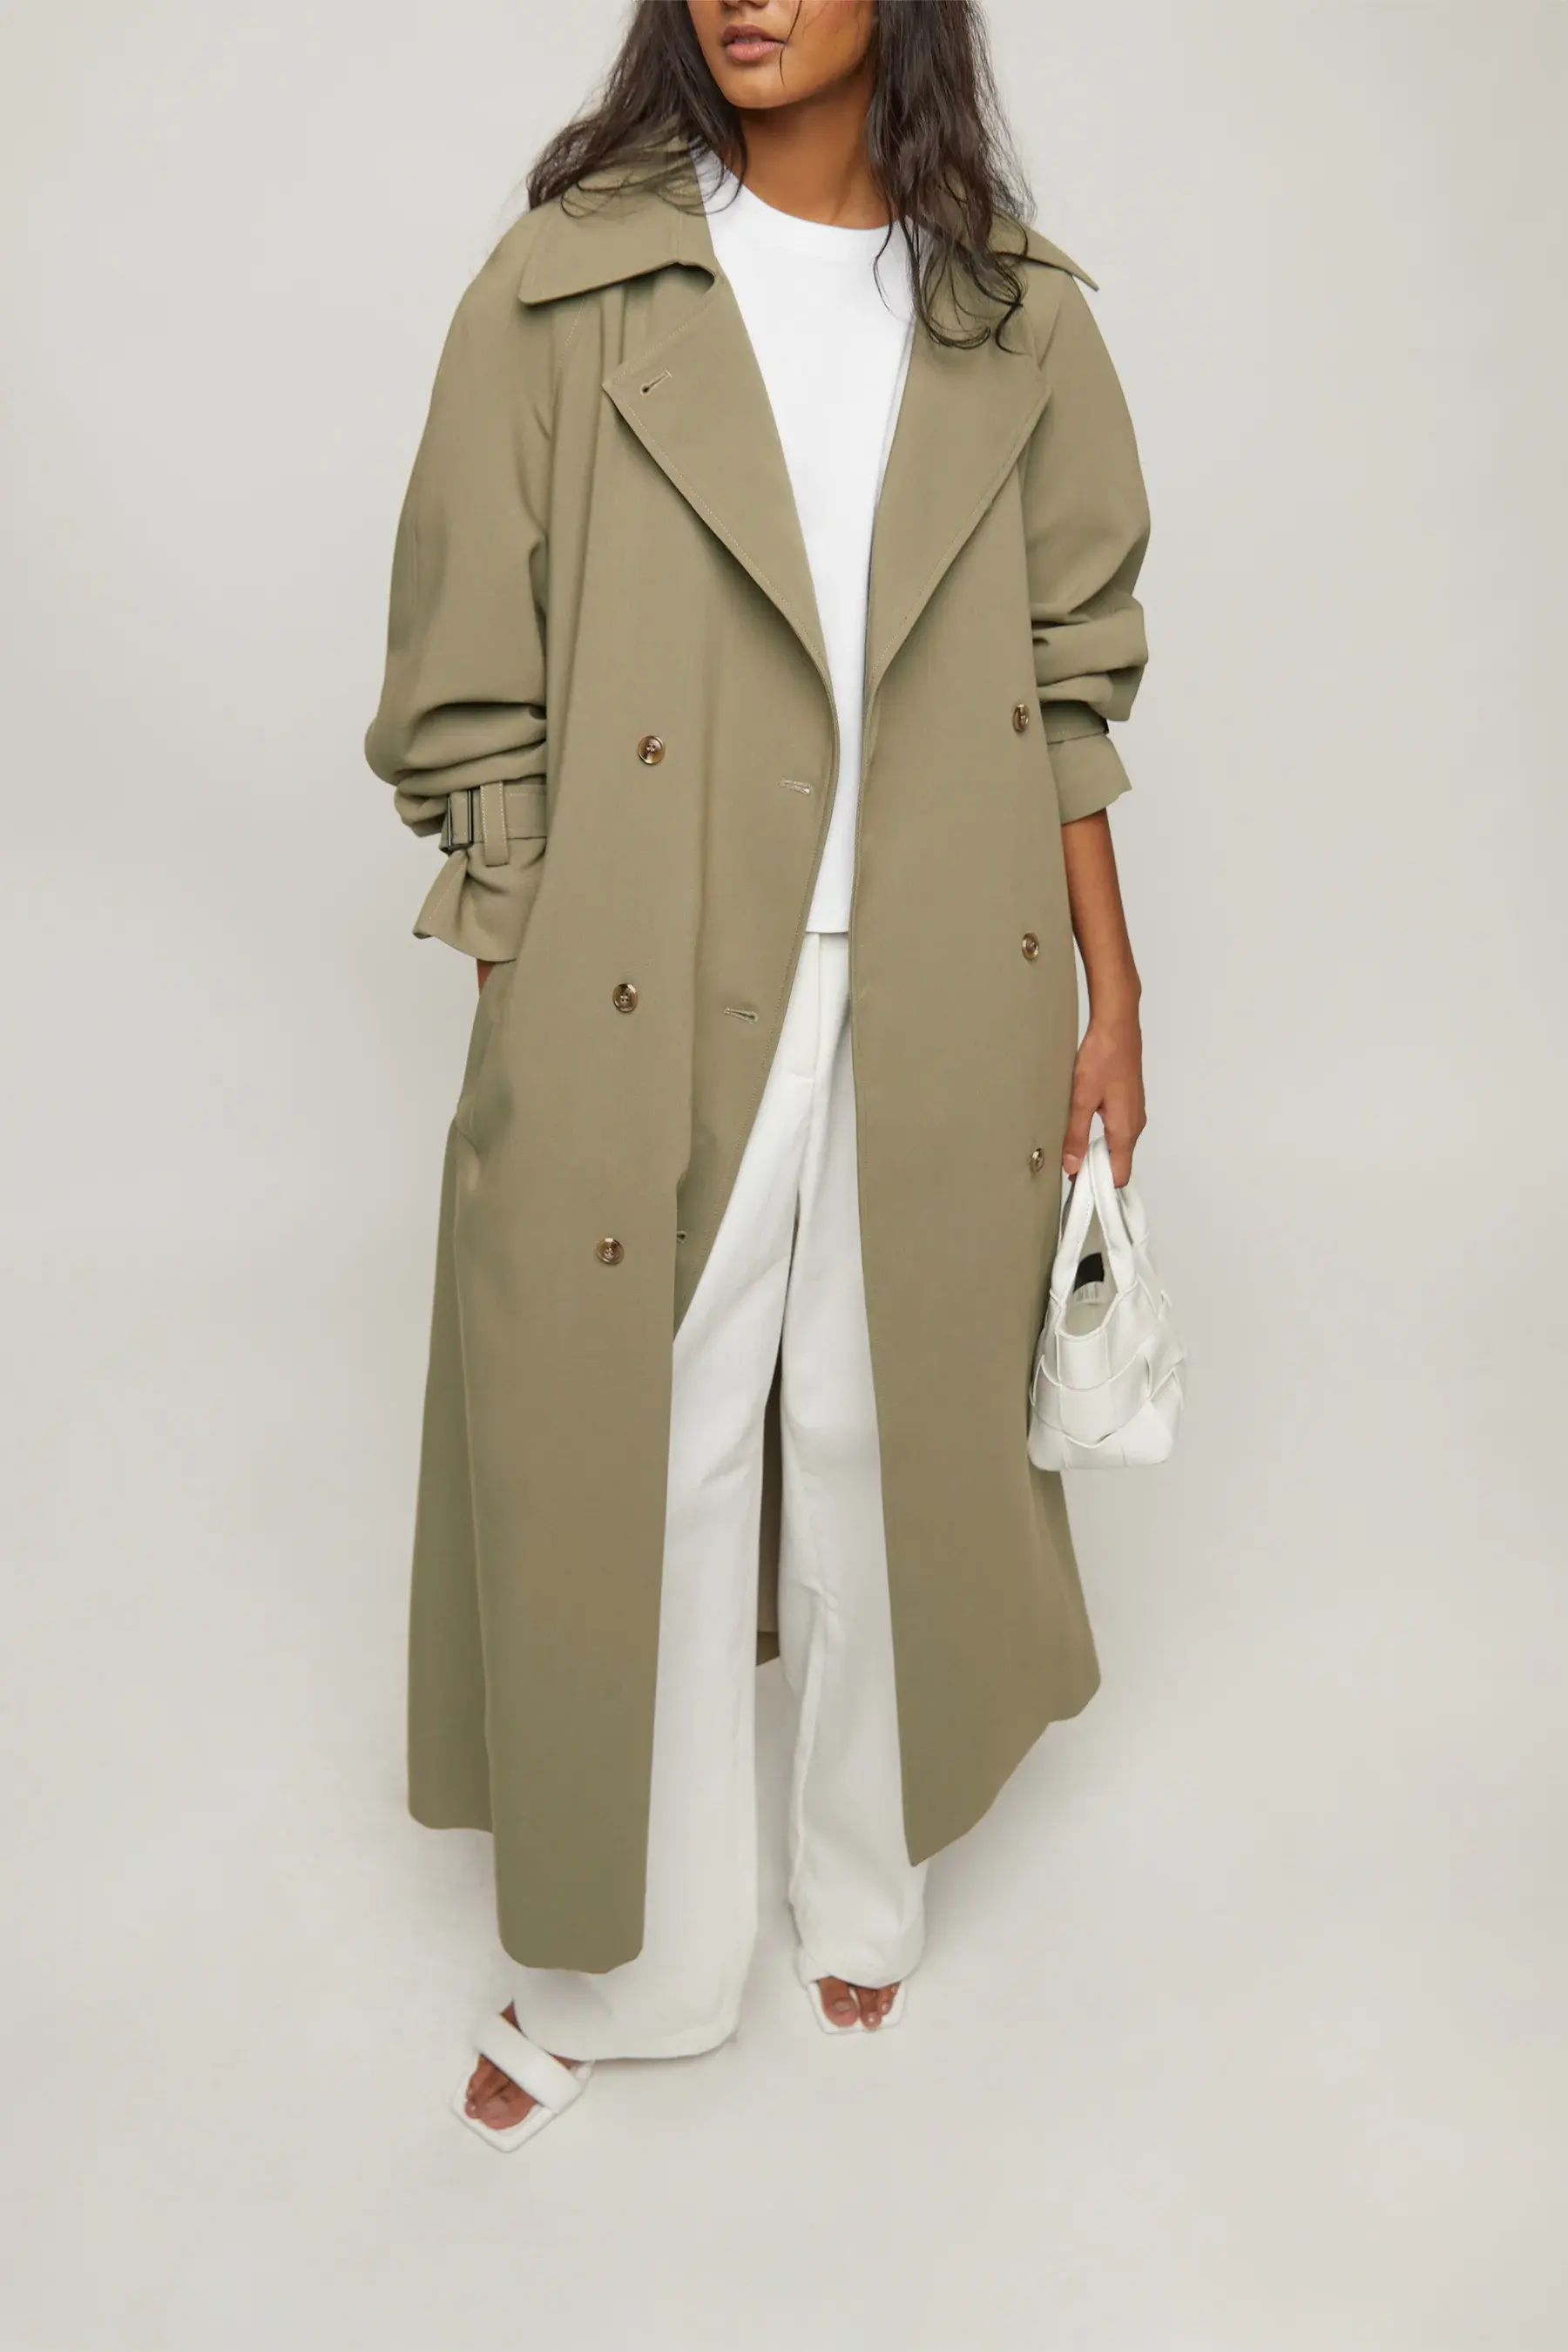 OVERSIZED TRENCH COAT        4.5 star rating   41 Reviews          $188    
 OW-10088-W  MOSS  Be... | OAK + FORT